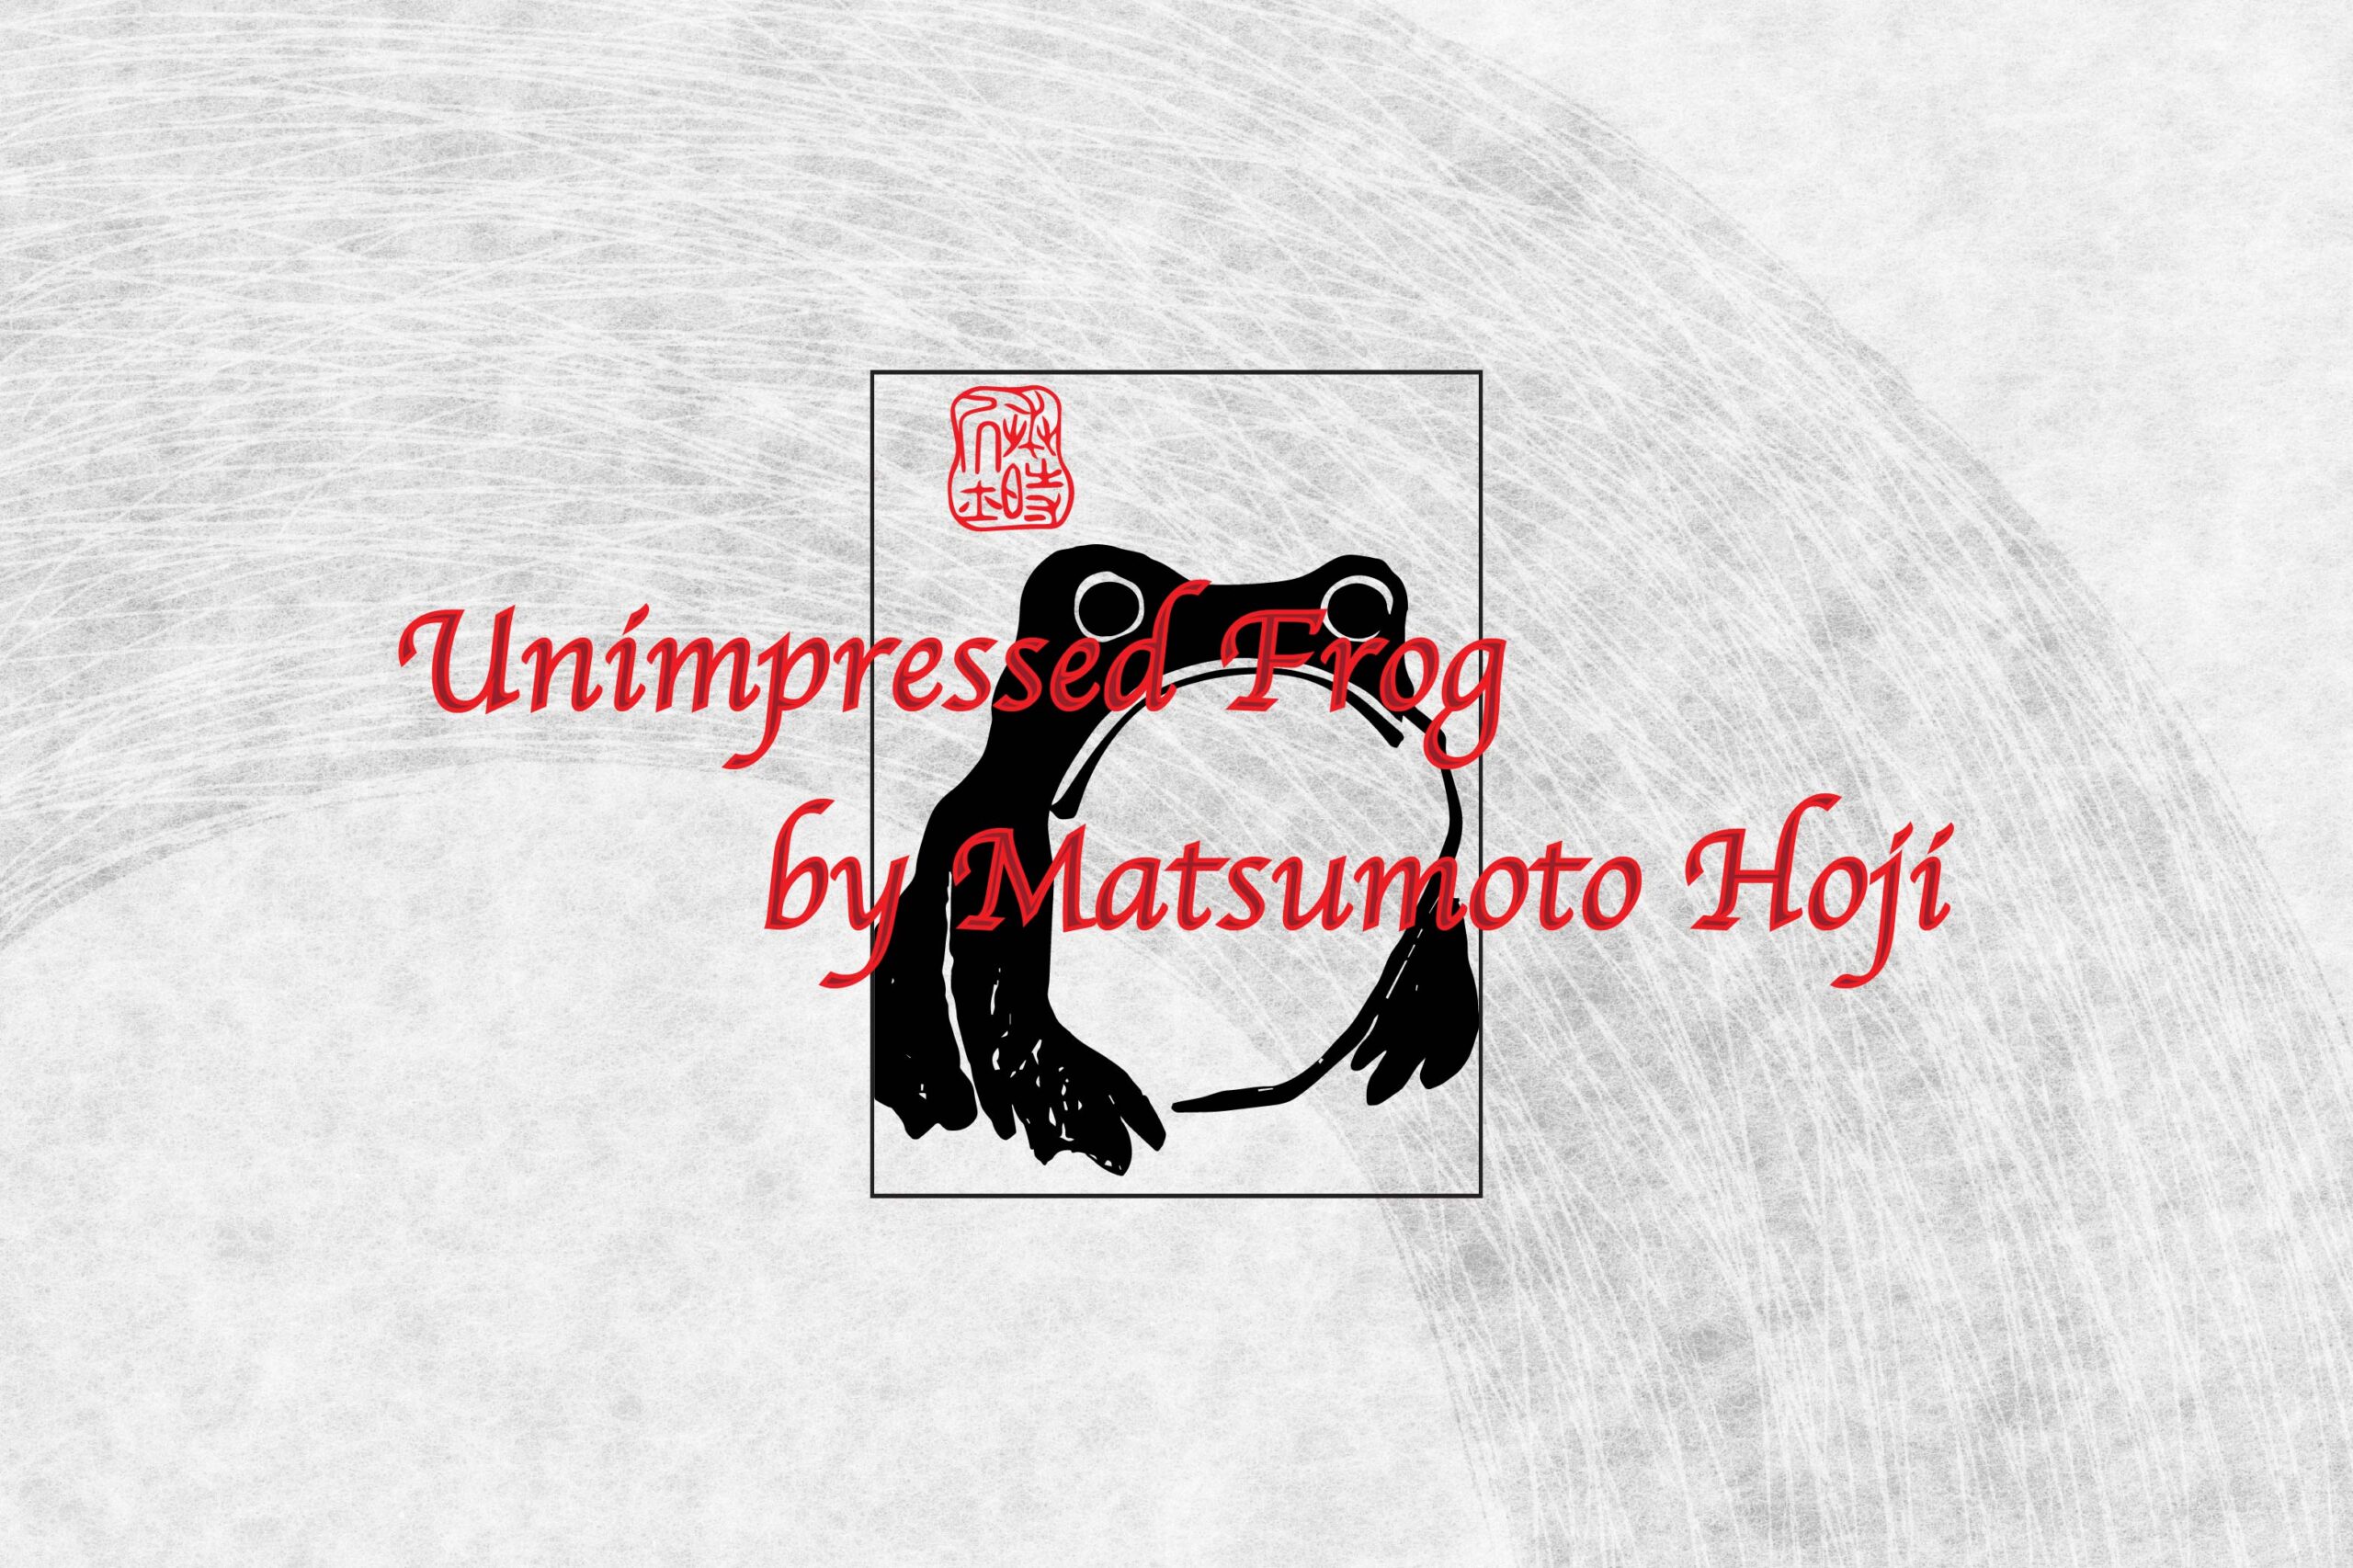 Unimpressed From by Matsumoto hoji for download